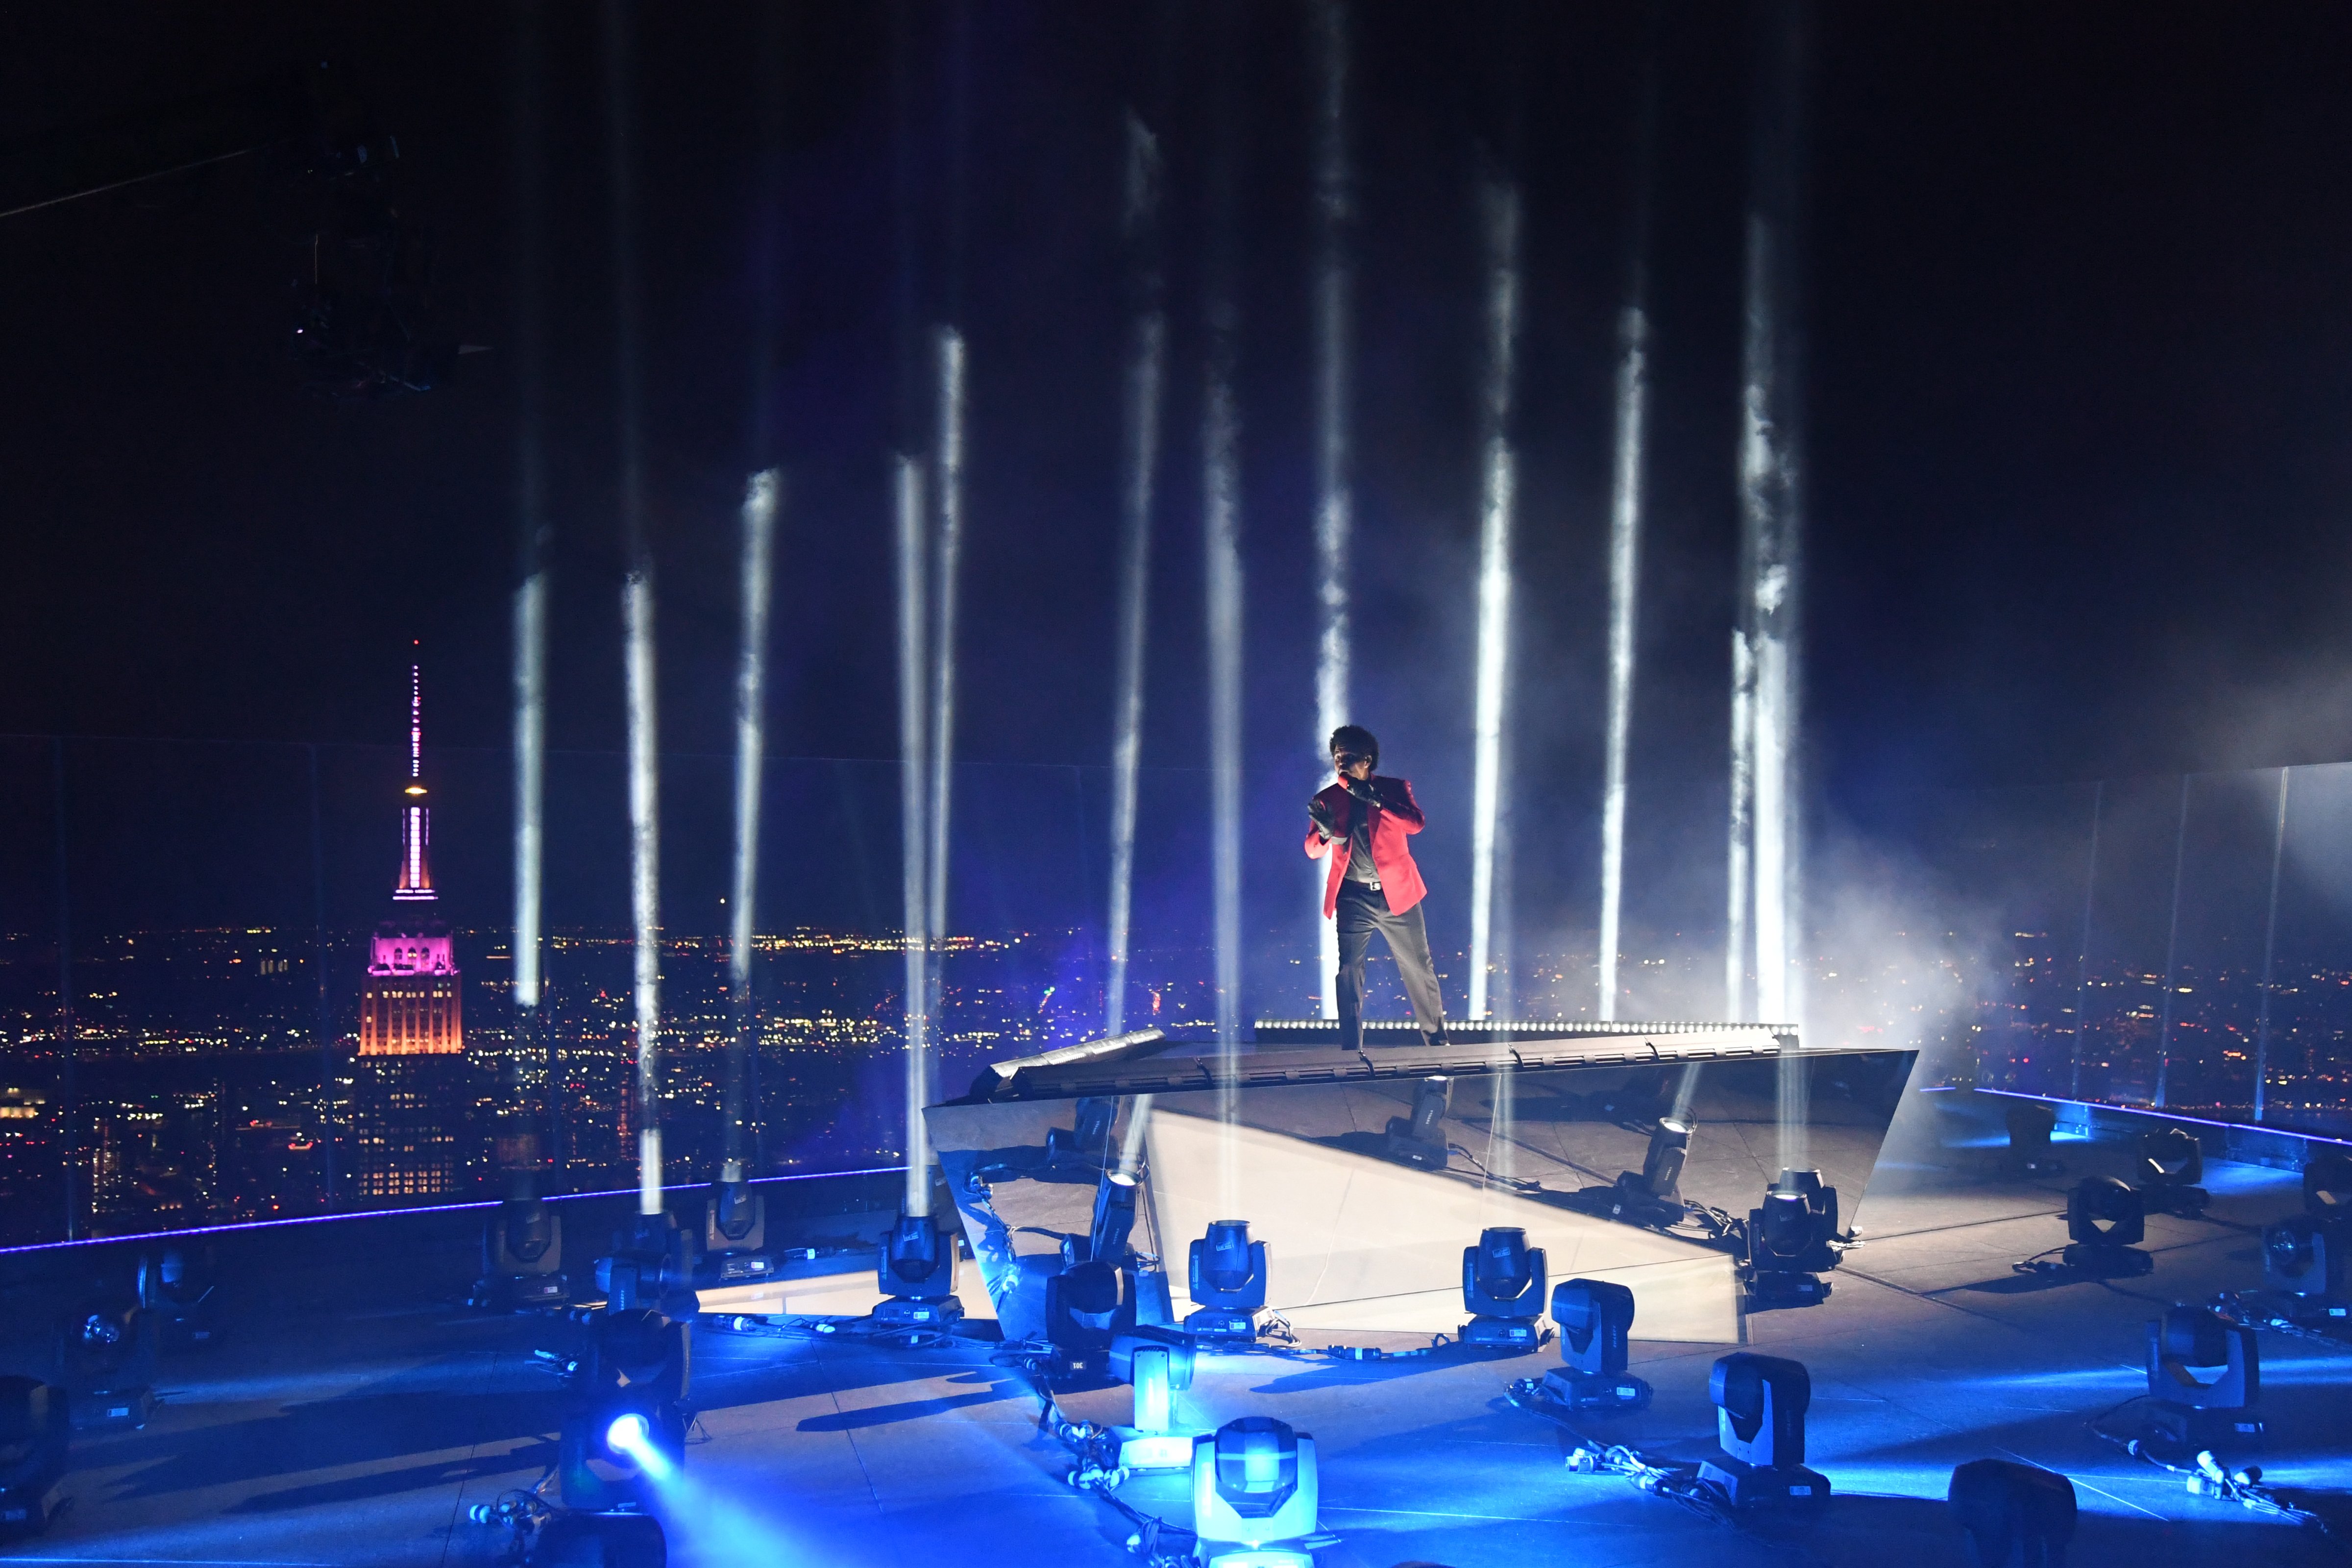 The Weeknd performs at Edge at Hudson Yards for the 2020 MTV Video Music Awards, broadcast on Sunday, August 30, 2020 in New York City. (Getty Images for MTV—MTV)